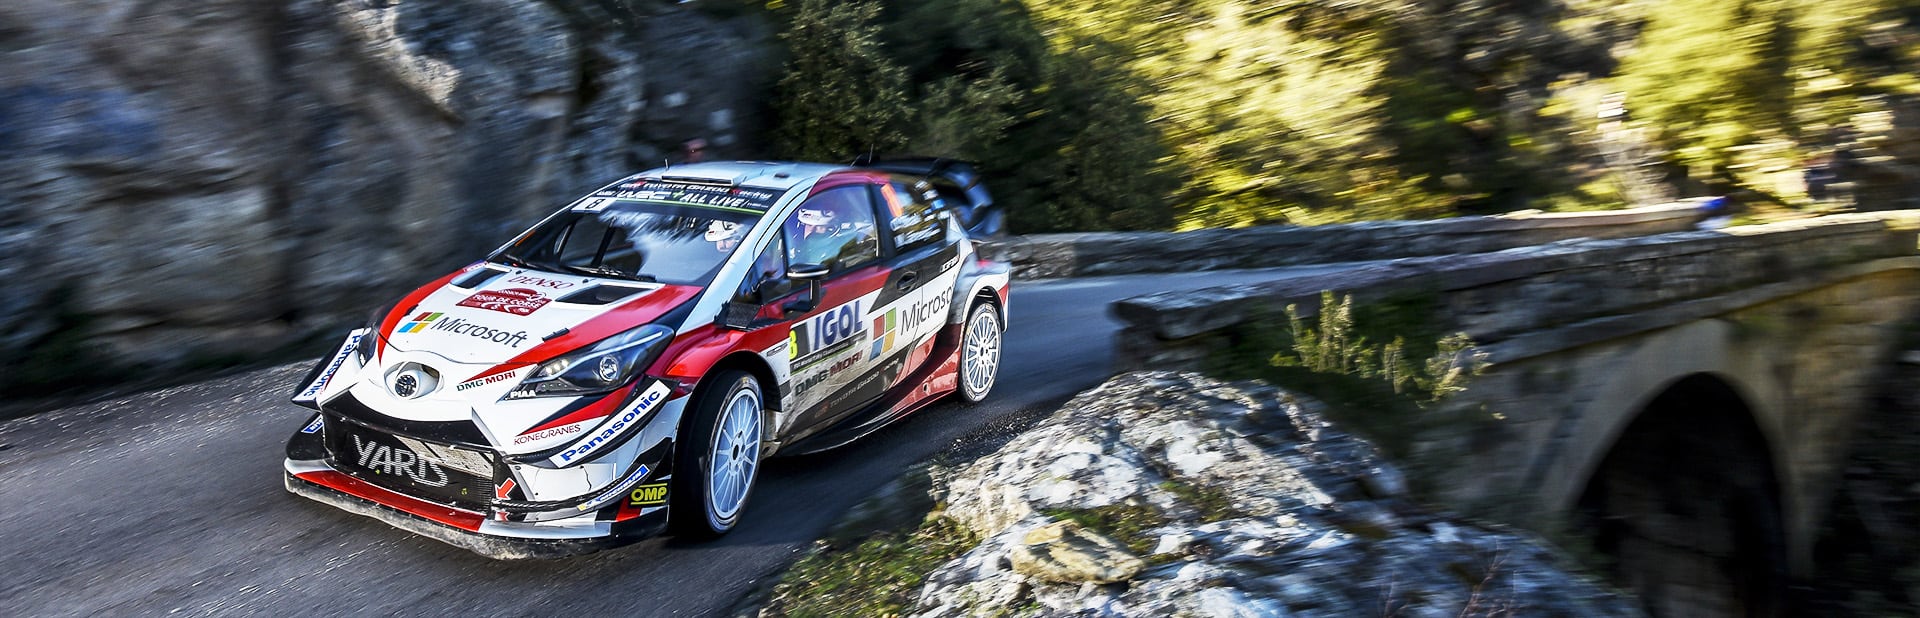 Rally France (Tour de Corse): Day 3 Tänak takes second, Lappi wins the Power Stage